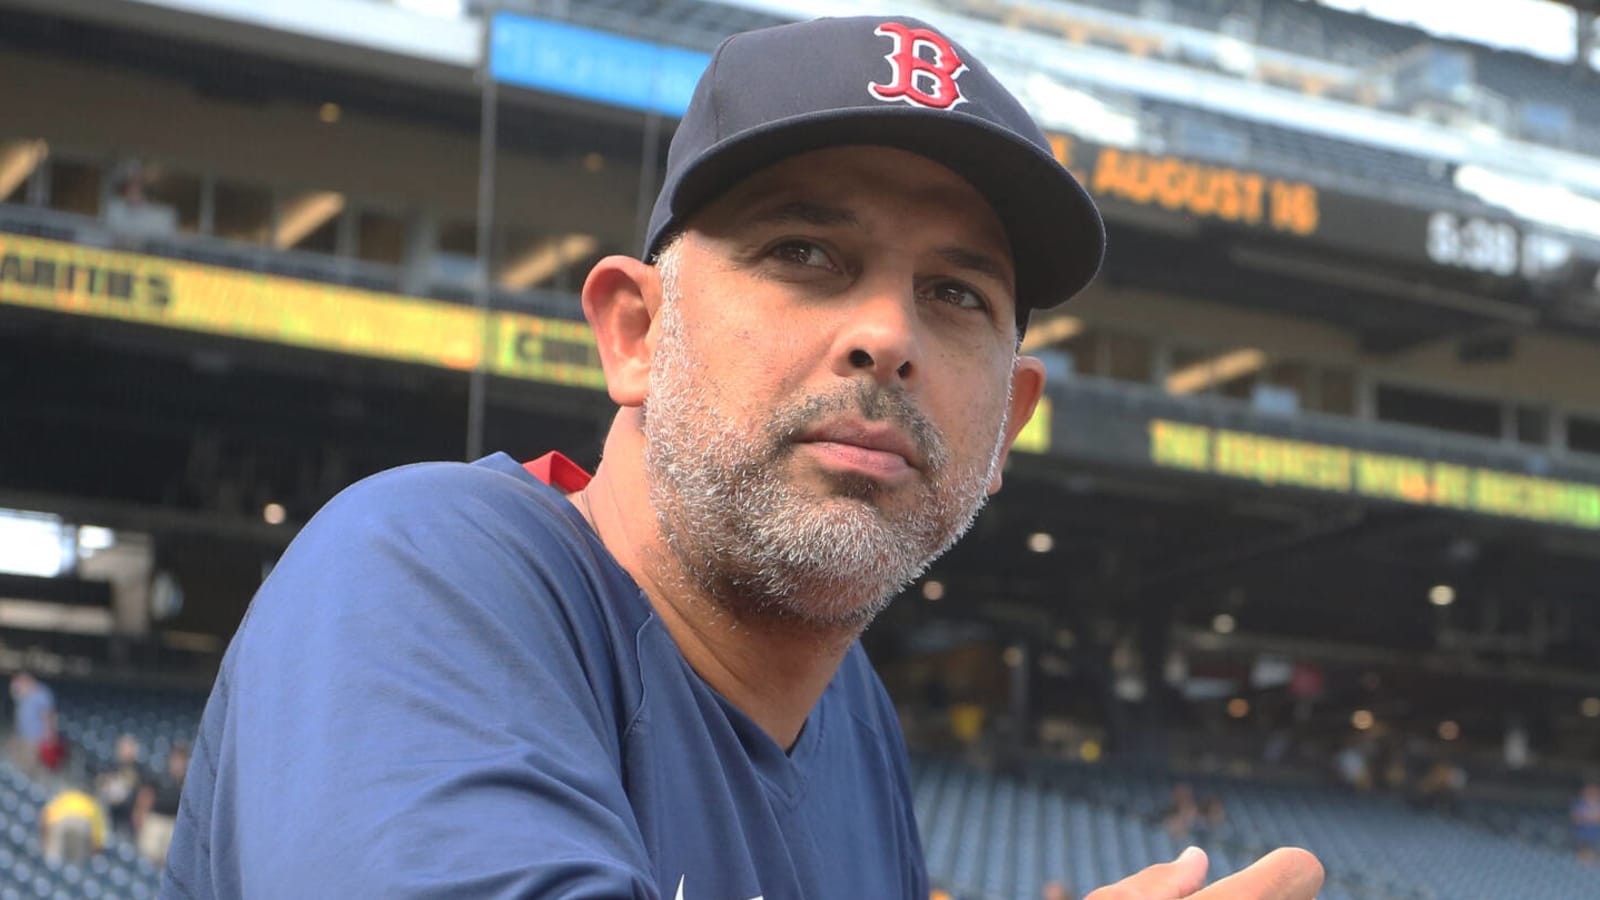 Alex Cora sign-stealing: Red Sox should go into full rebuild if